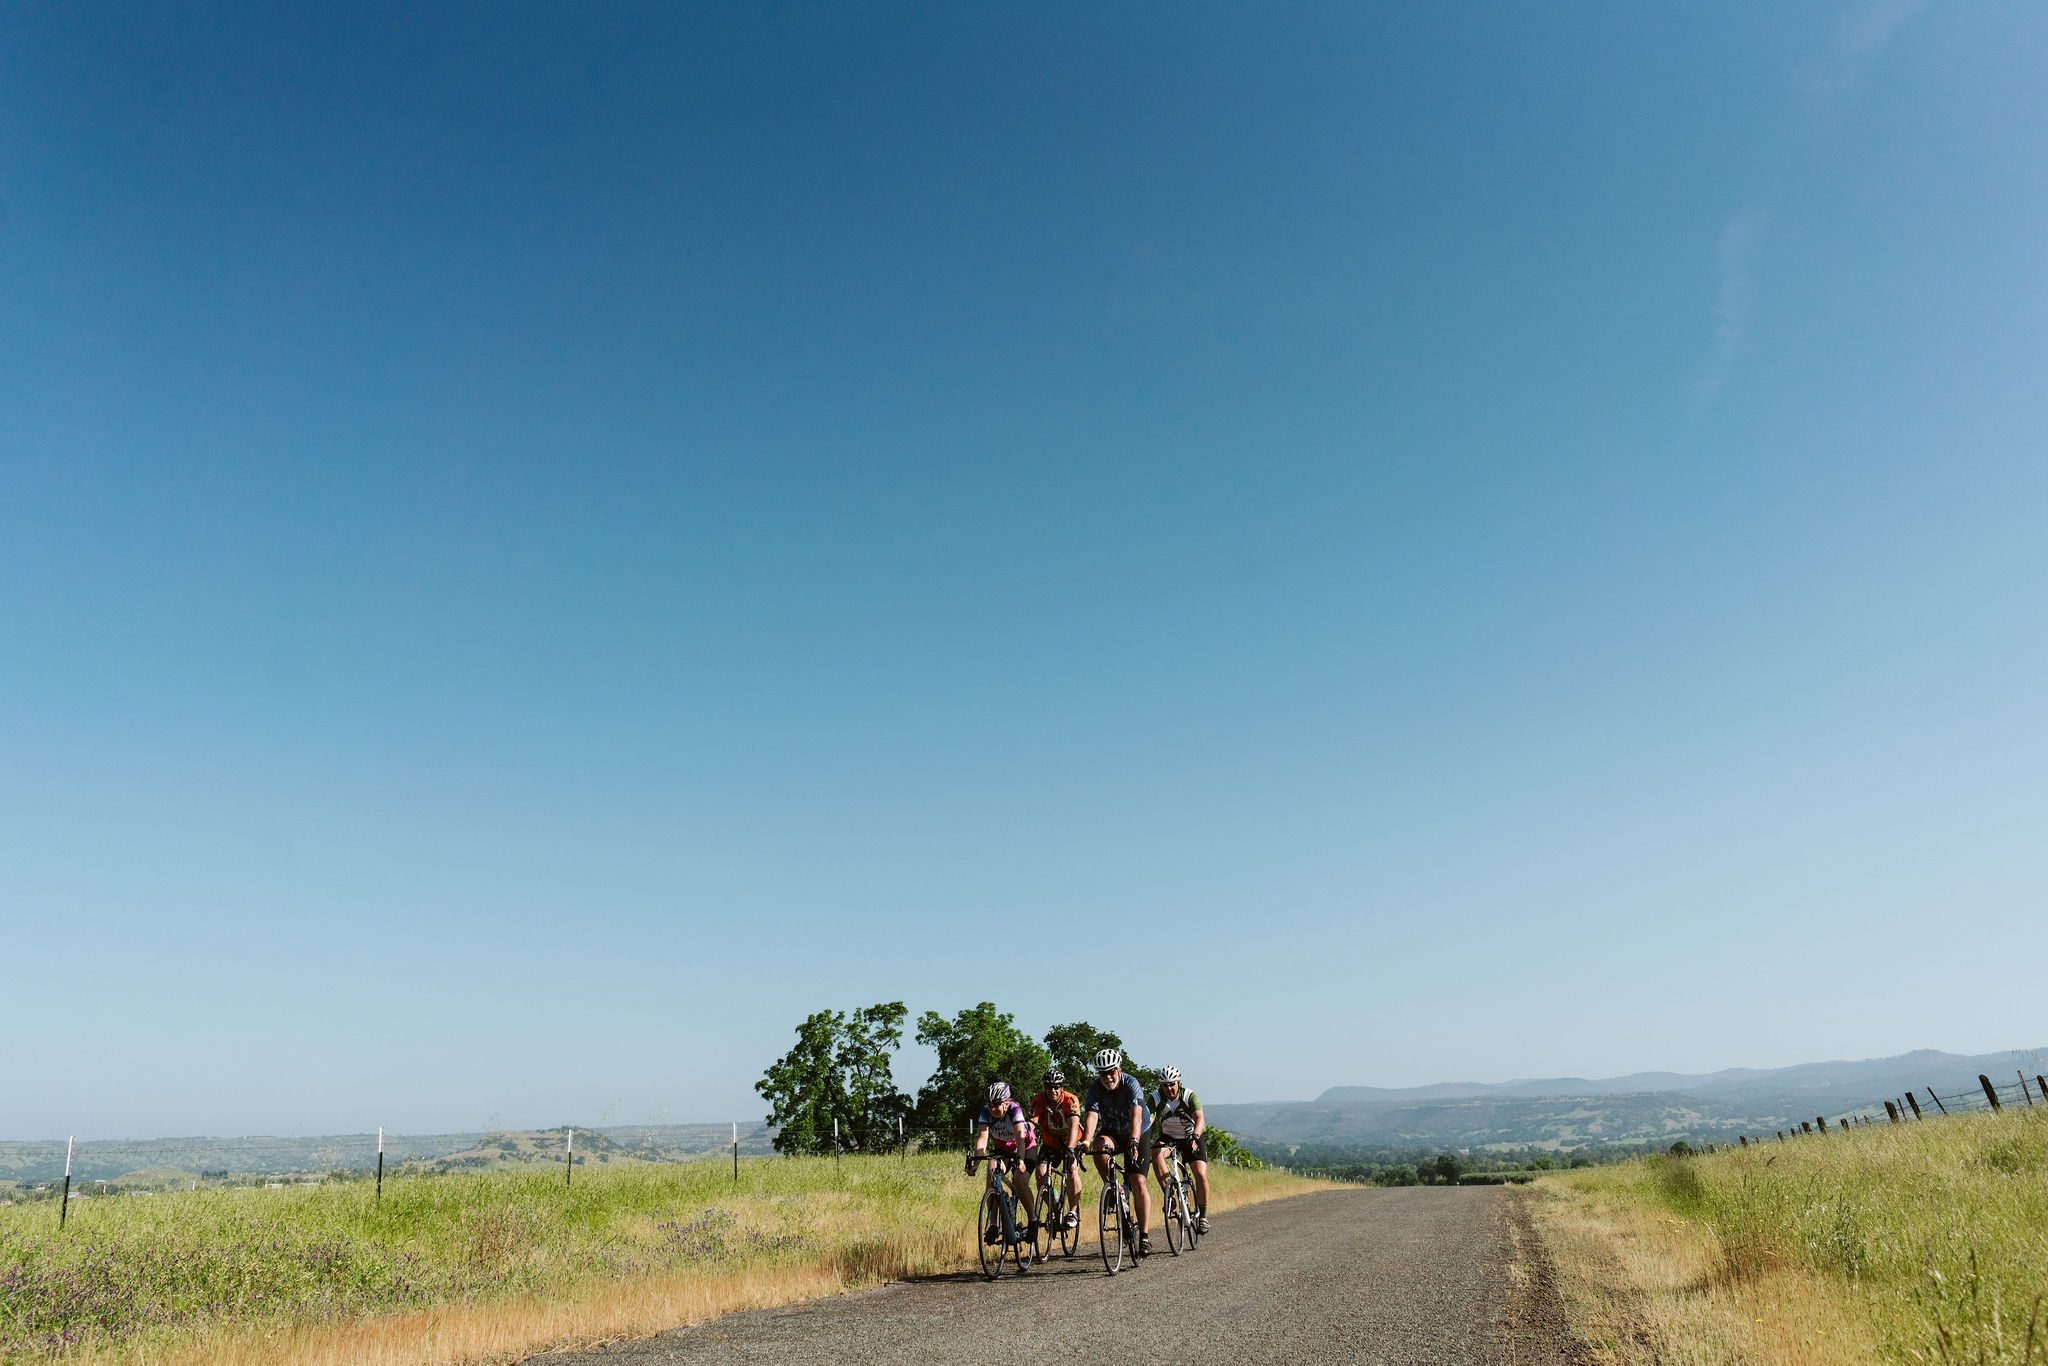 Group of cyclists riding with deep blue sky beyond